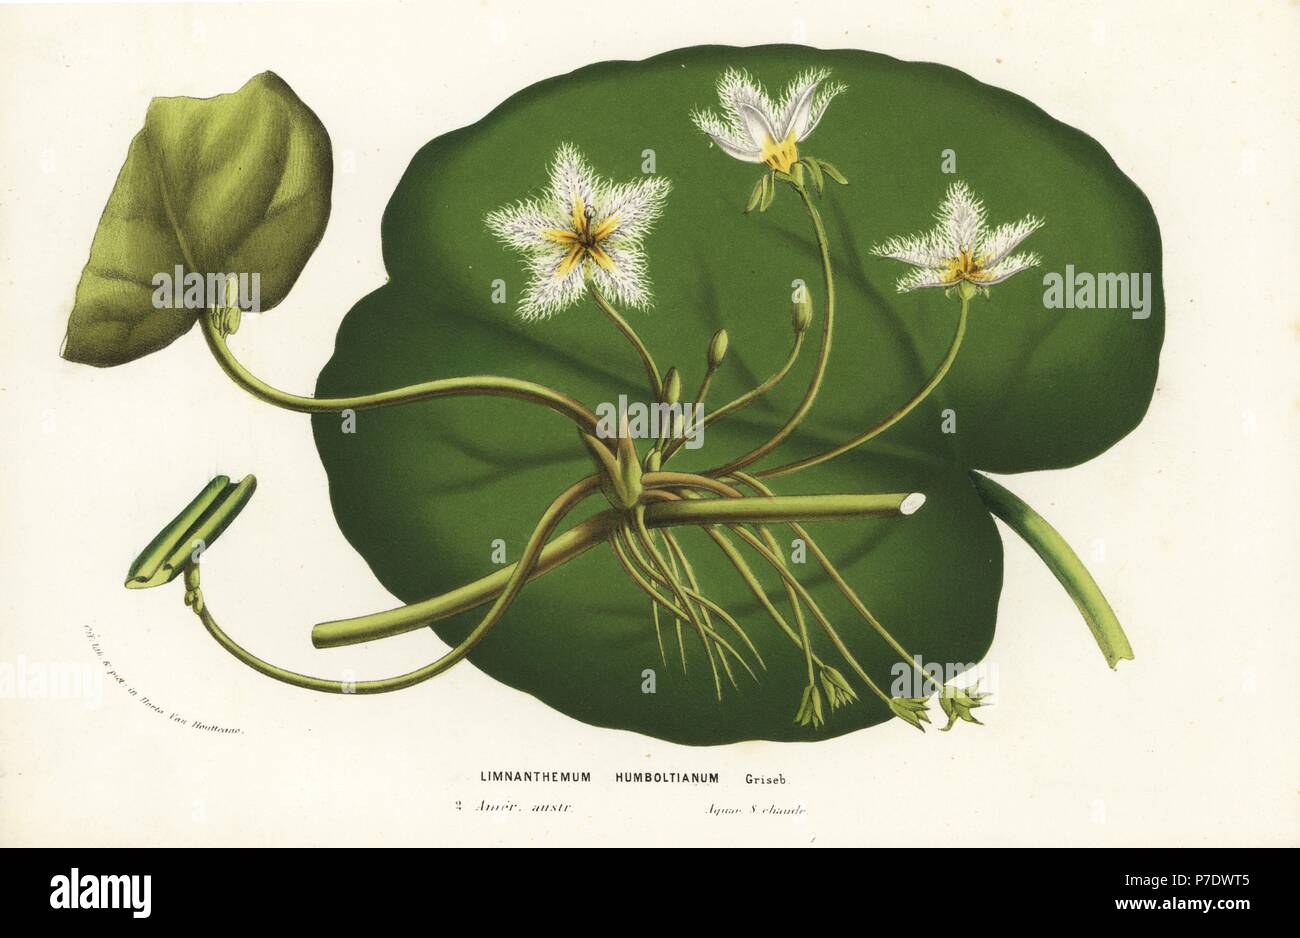 Water snowflake, Nymphoides indica (Limnanthemum humboltianum). Handcoloured lithograph from Louis van Houtte and Charles Lemaire's Flowers of the Gardens and Hothouses of Europe, Flore des Serres et des Jardins de l'Europe, Ghent, Belgium, 1856. Stock Photo